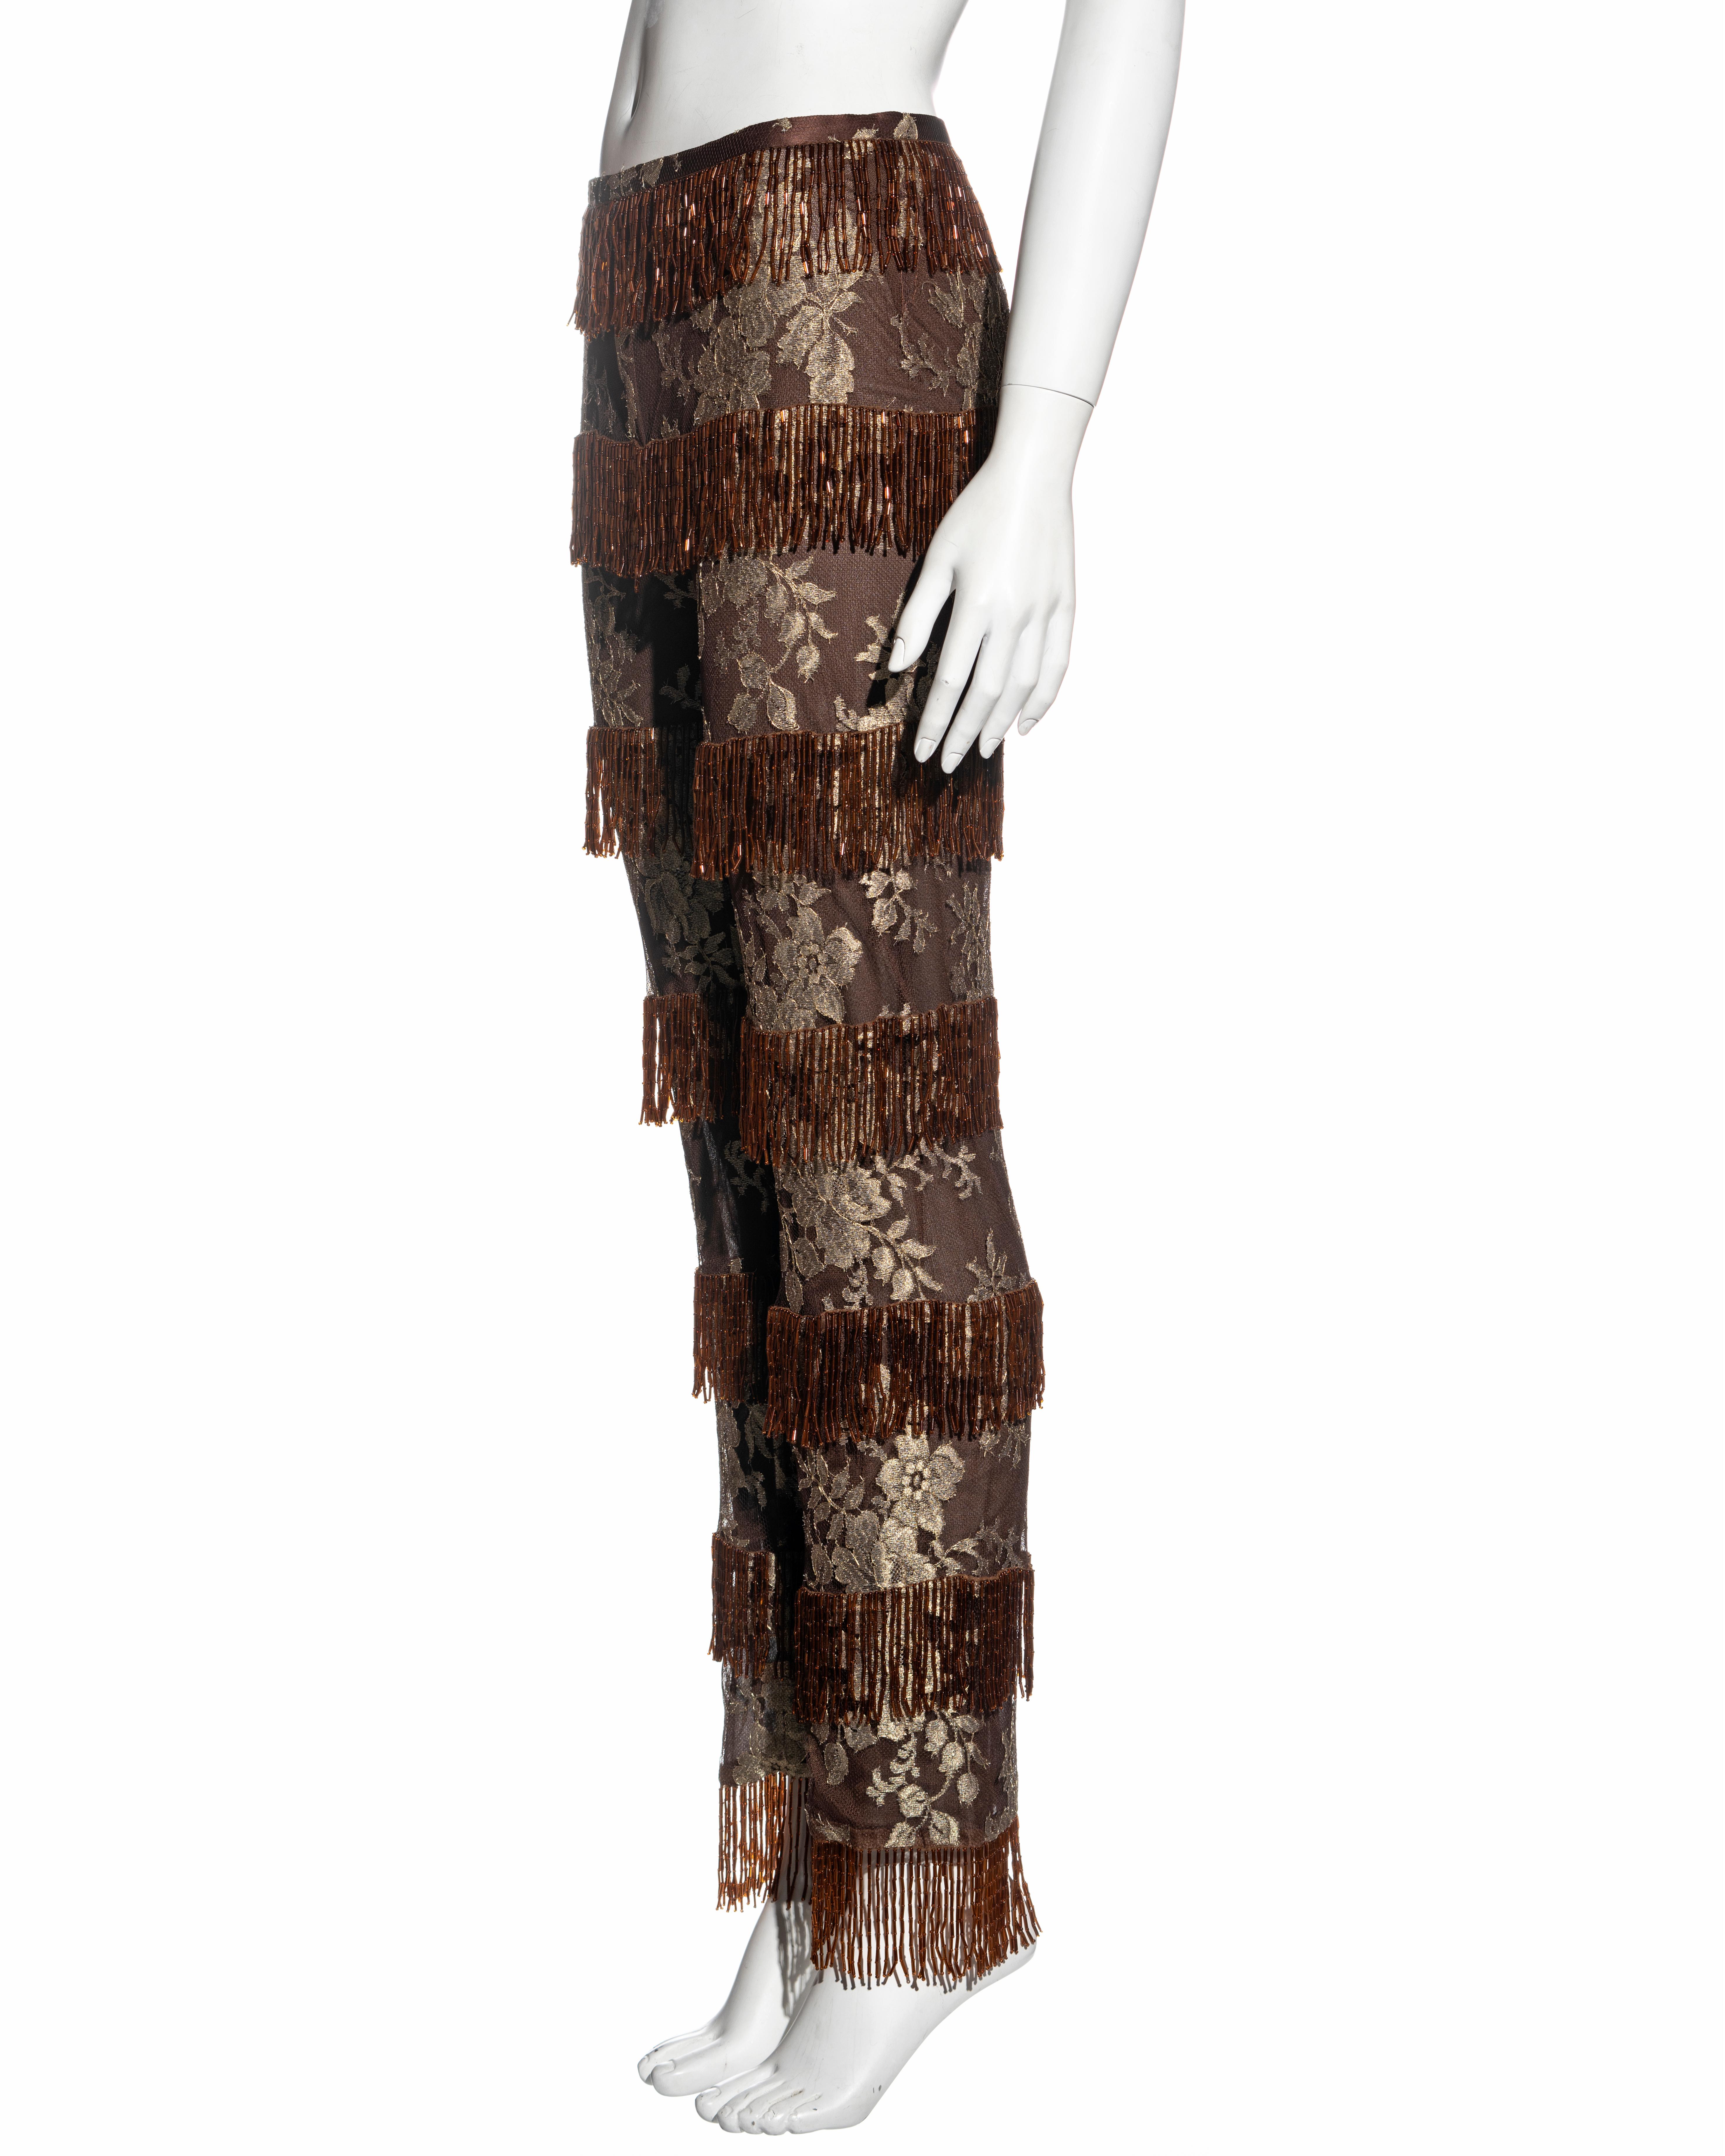 Dolce & Gabbana metallic gold and copper lace beaded fringe pants, ss 2000 For Sale 1